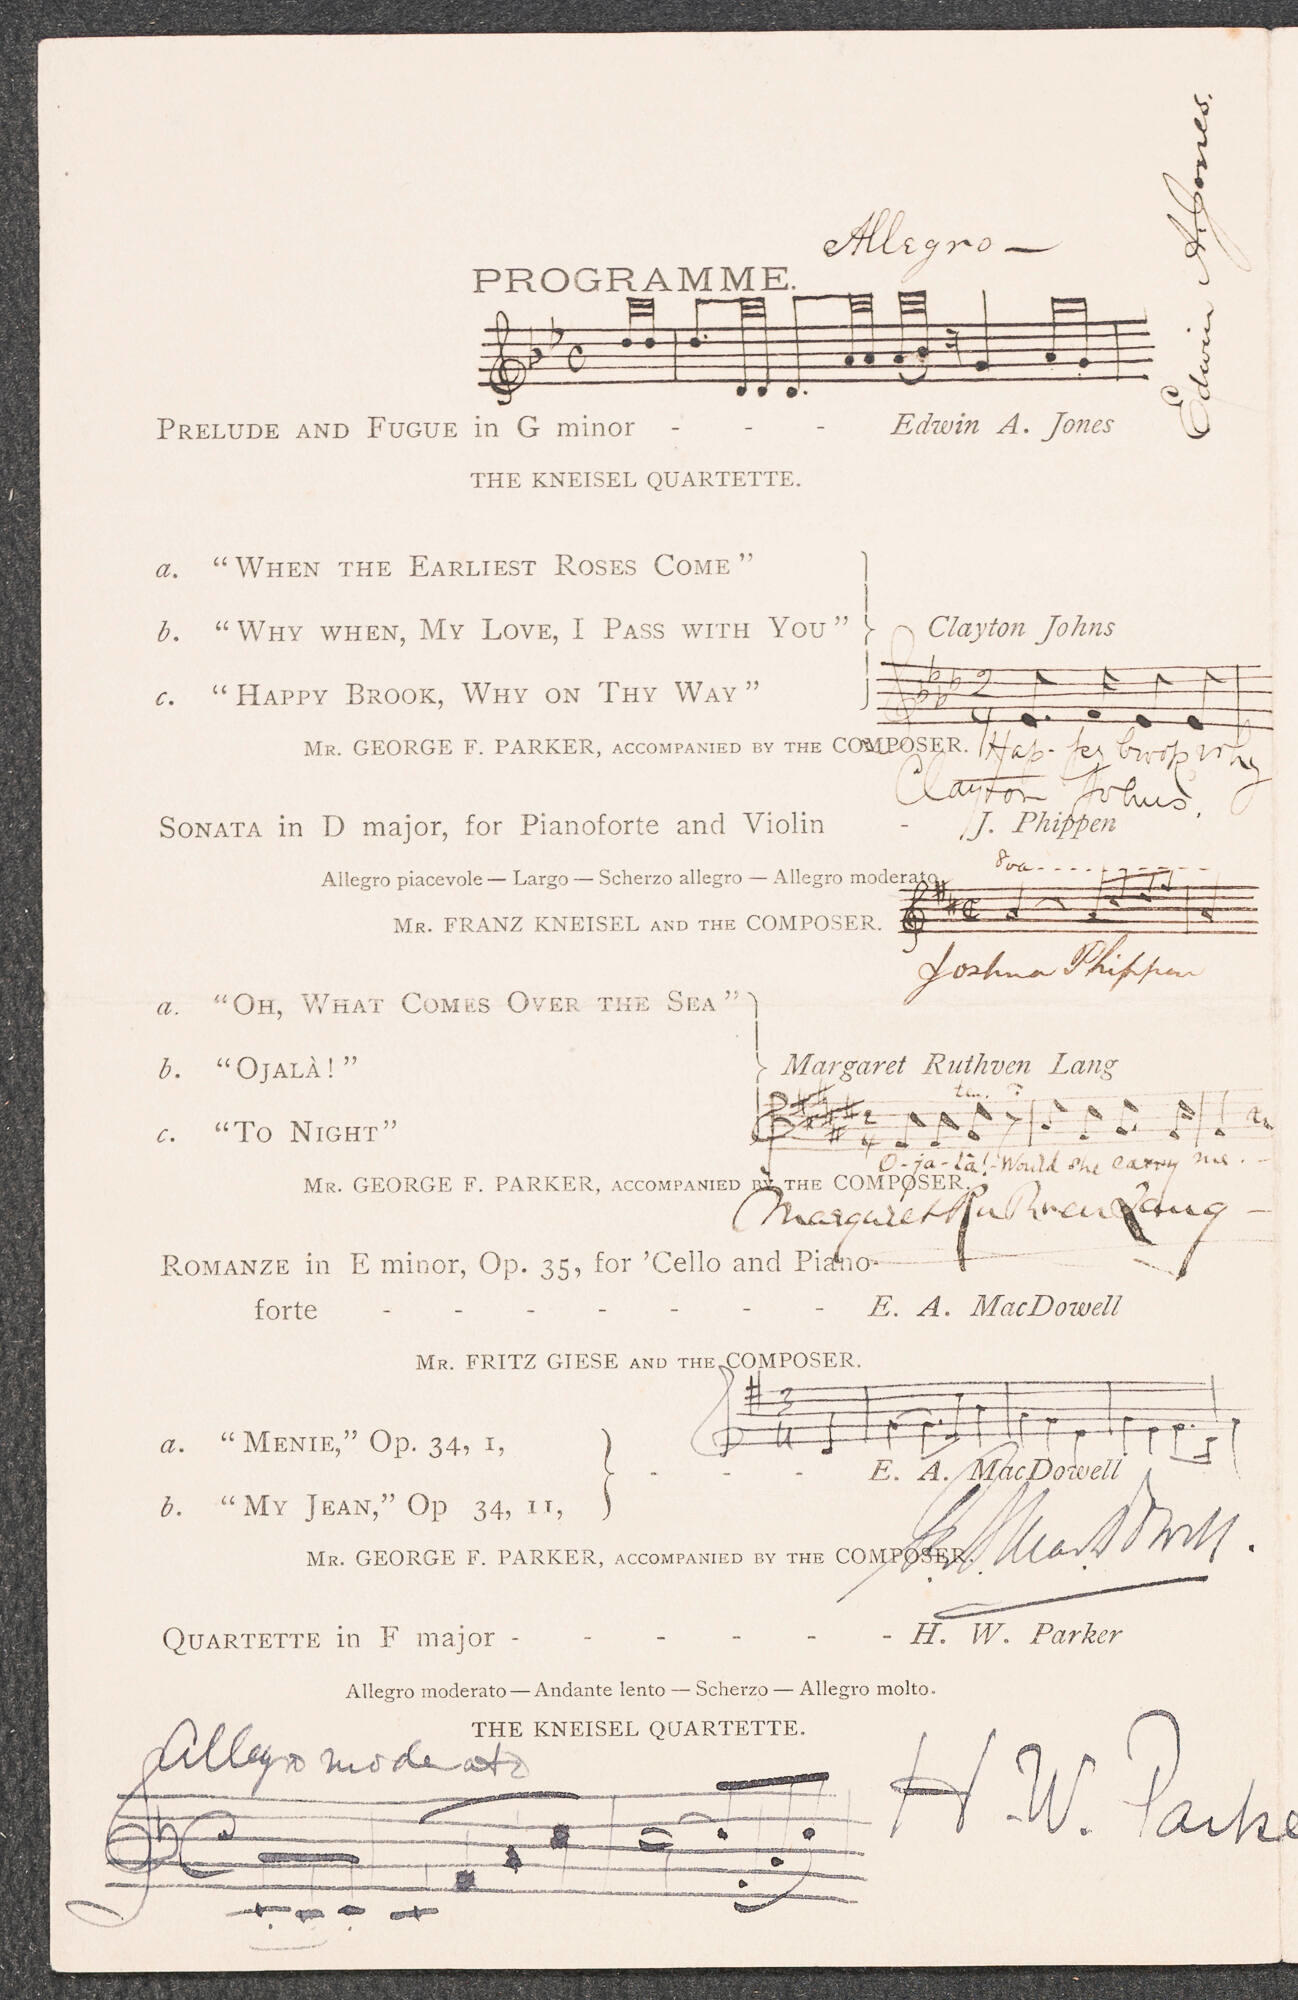 A printed list of musical works by Edwin A. Jones, Clayton Johns, J. Phippen, E.A. MacDowell, H.W. Parker, and the Kneisel Quartette, with signatures of the composers and handwritten bars of music.